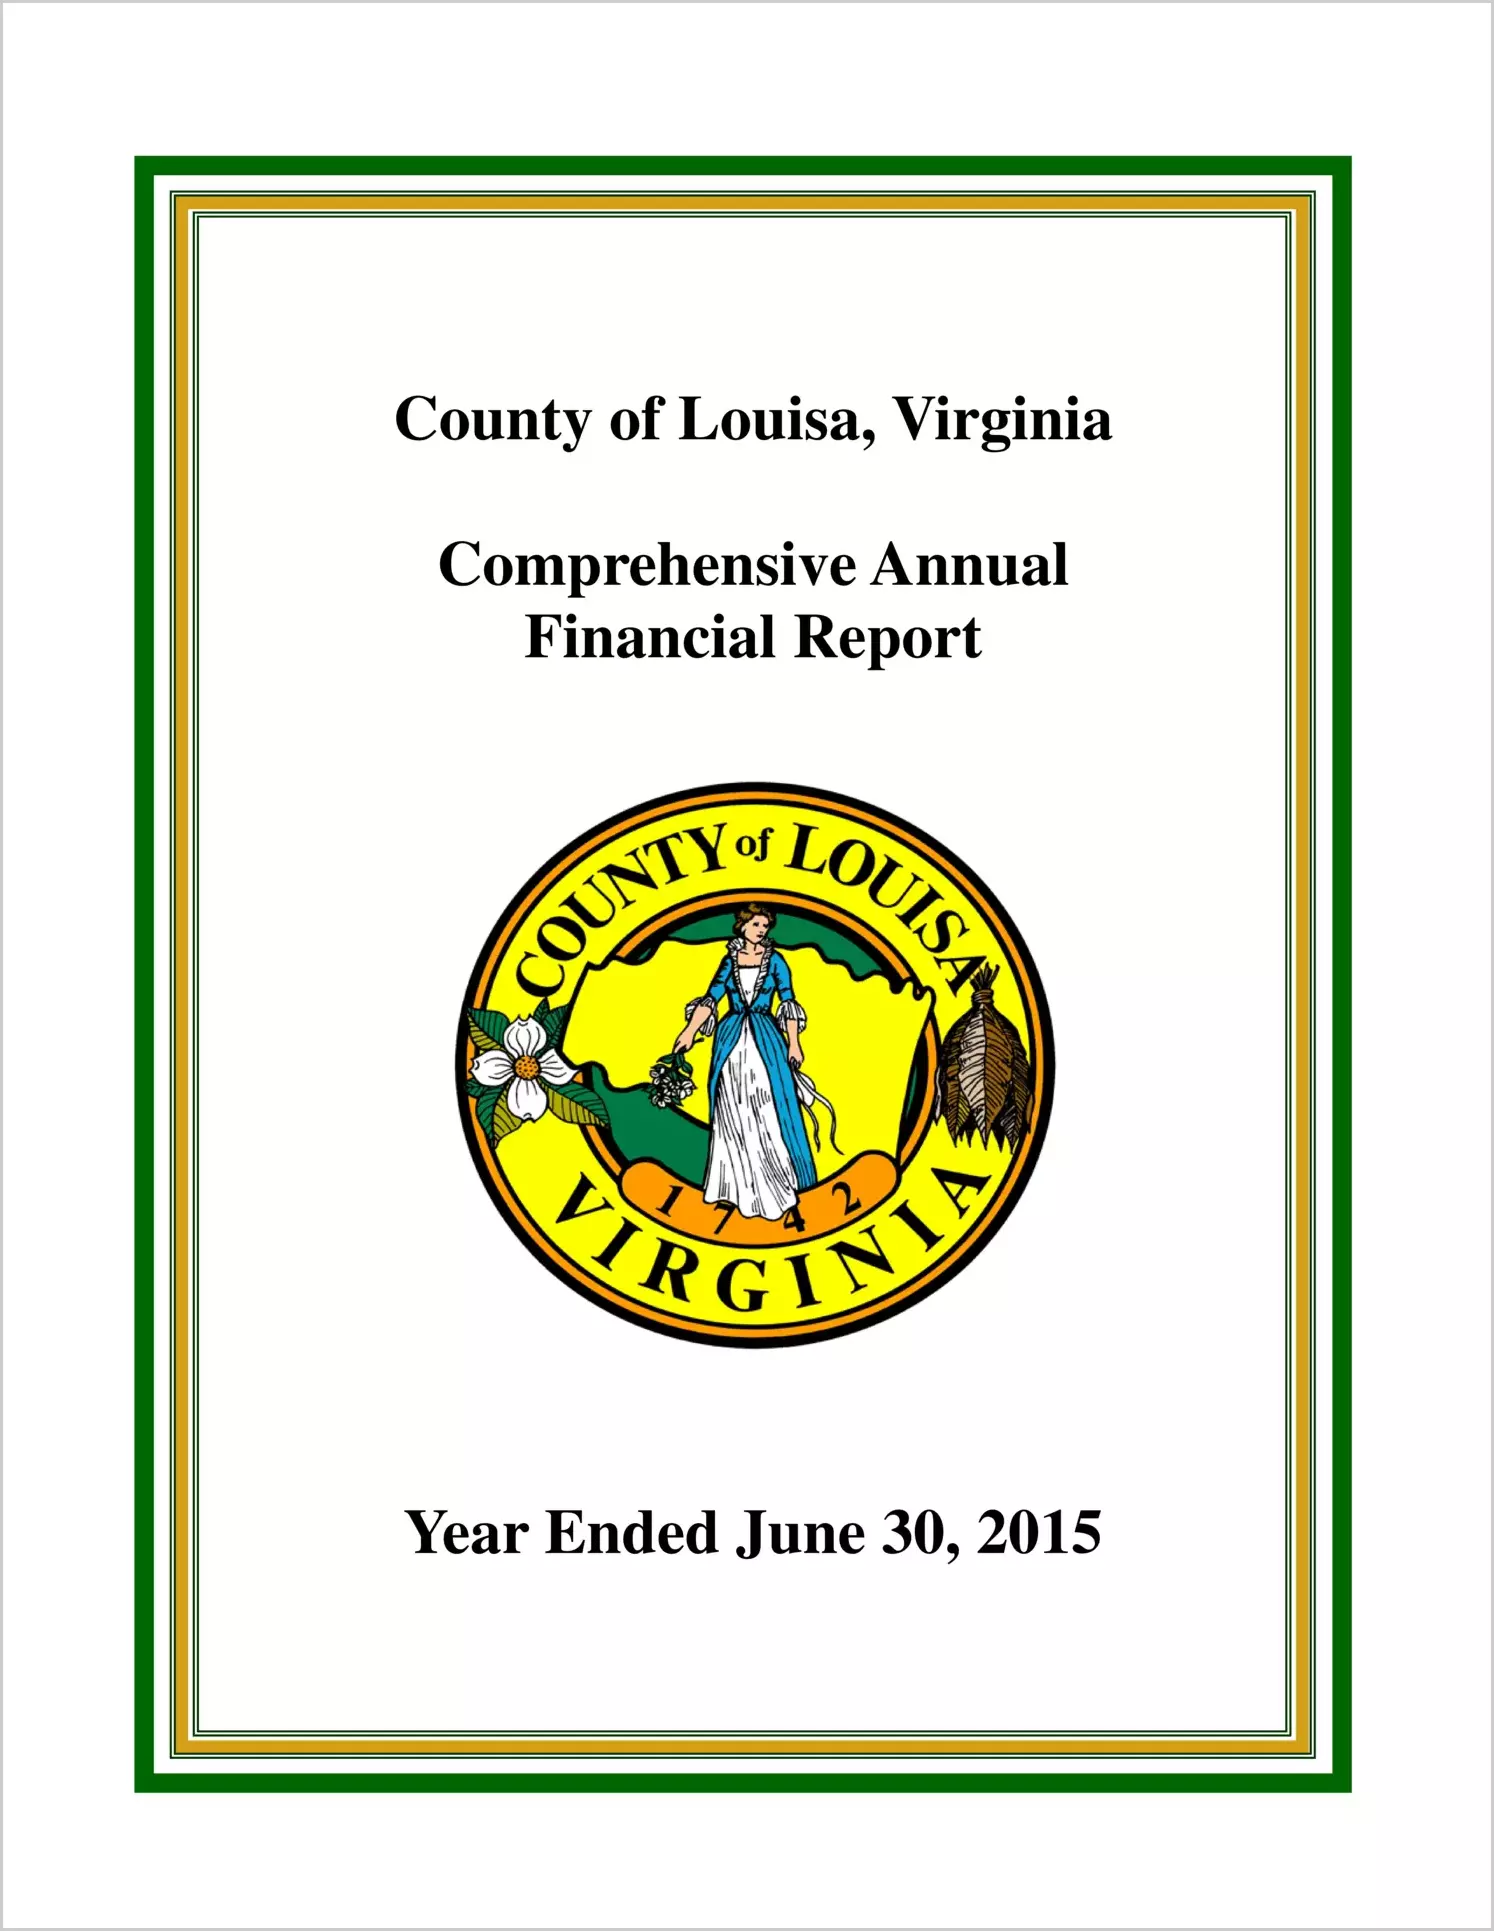 2015 Annual Financial Report for County of Louisa